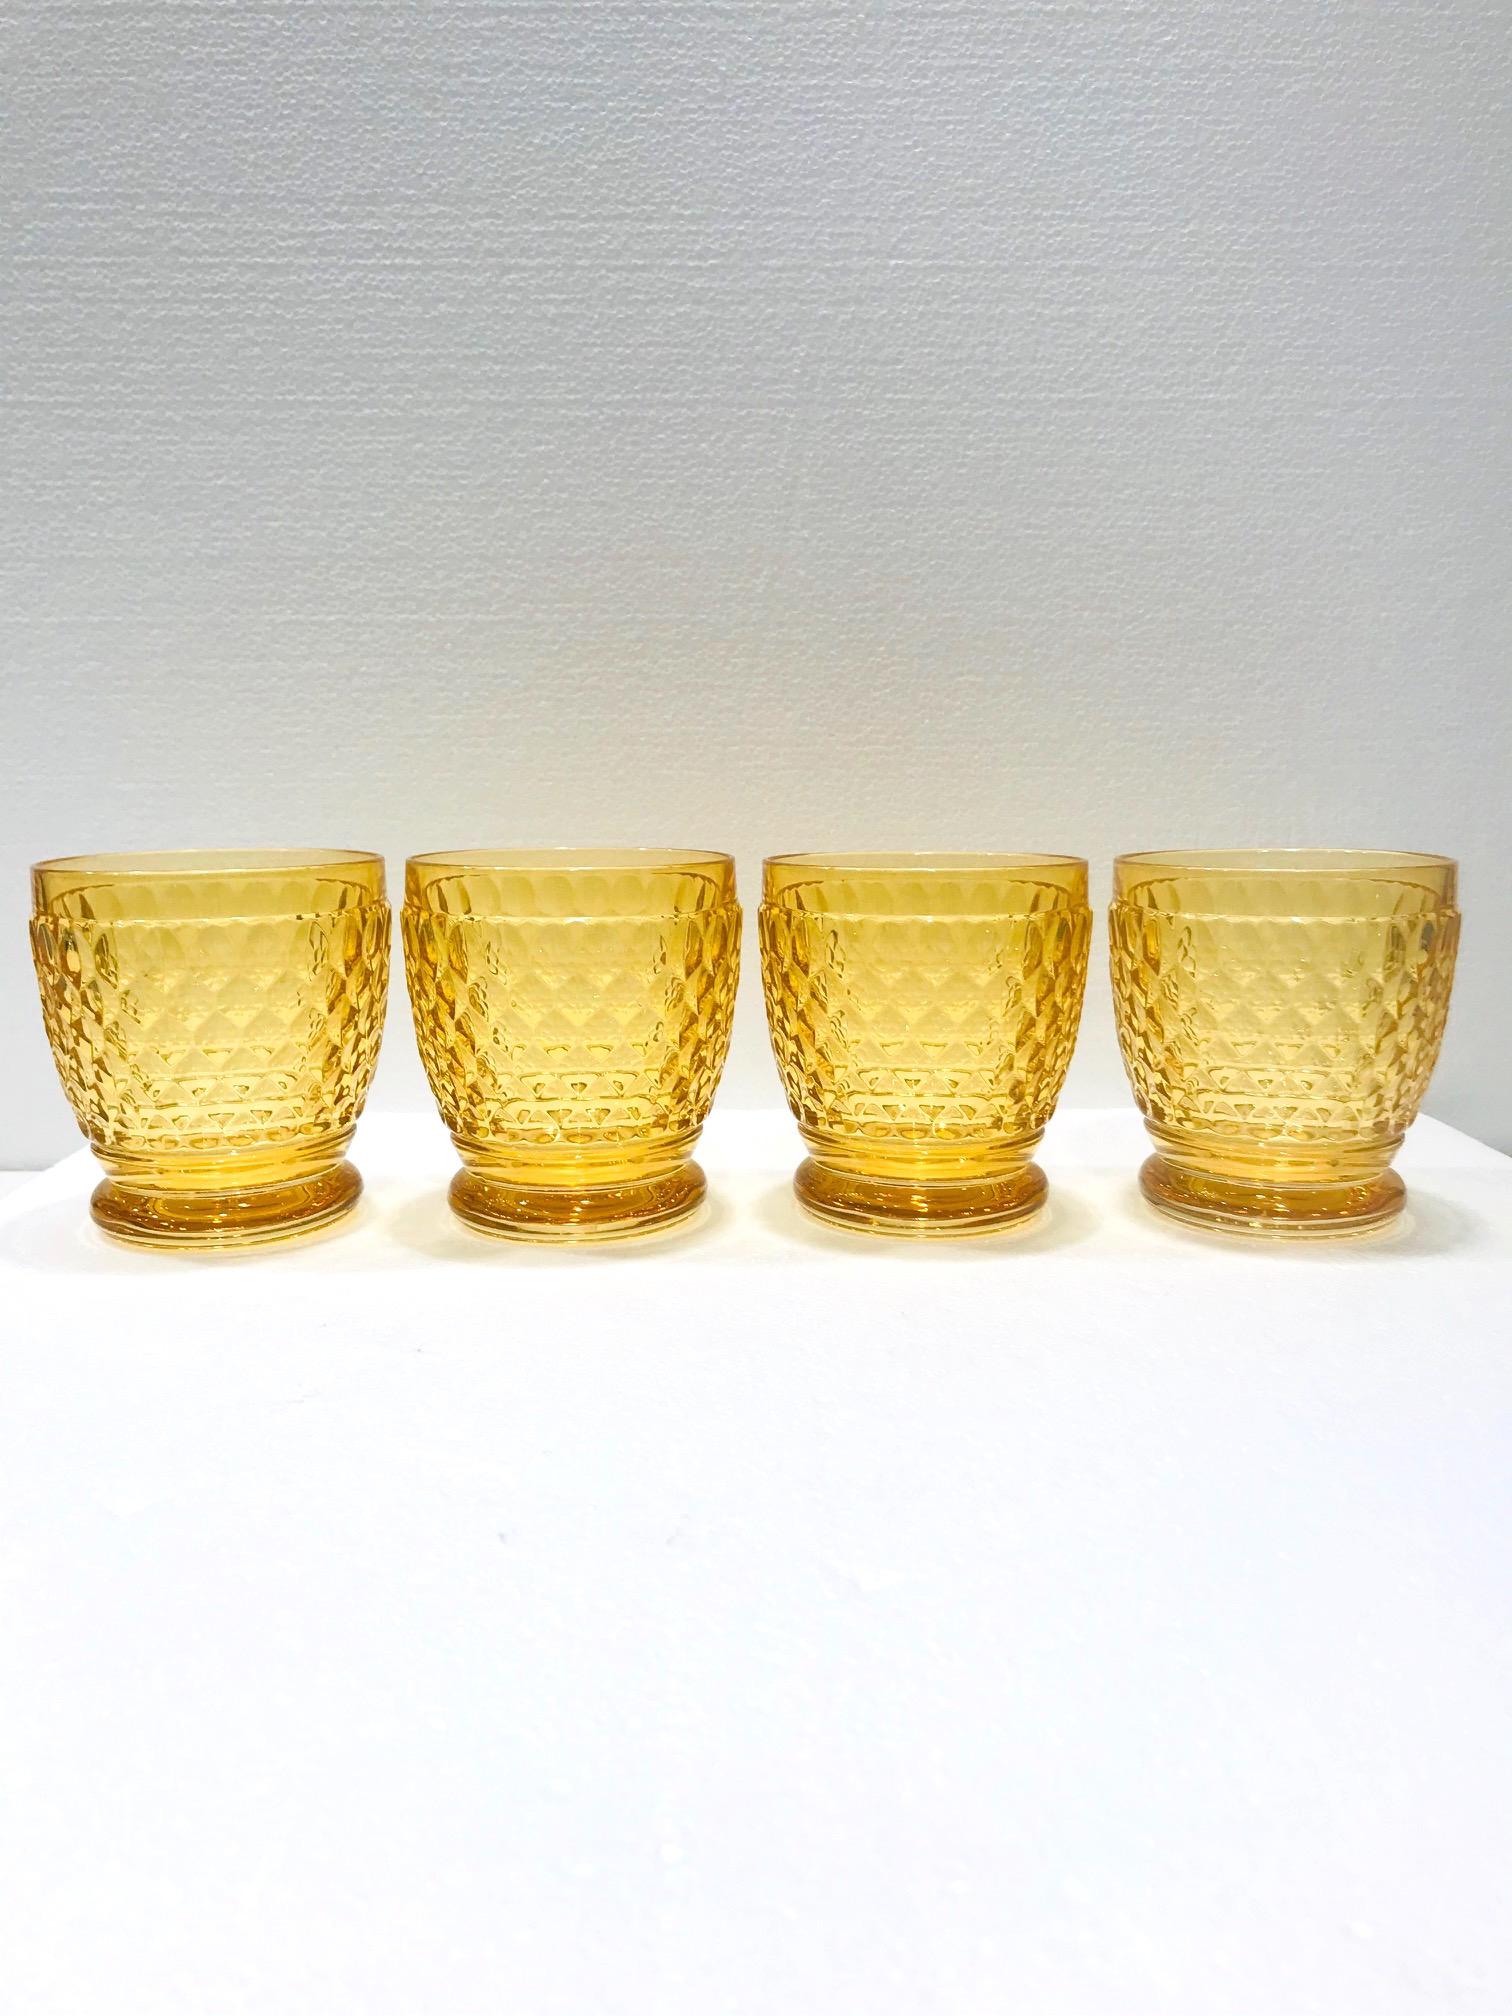 Modern Six Villeroy & Boch Crystal Water Glasses in Amber Yellow, Germany, circa 2005